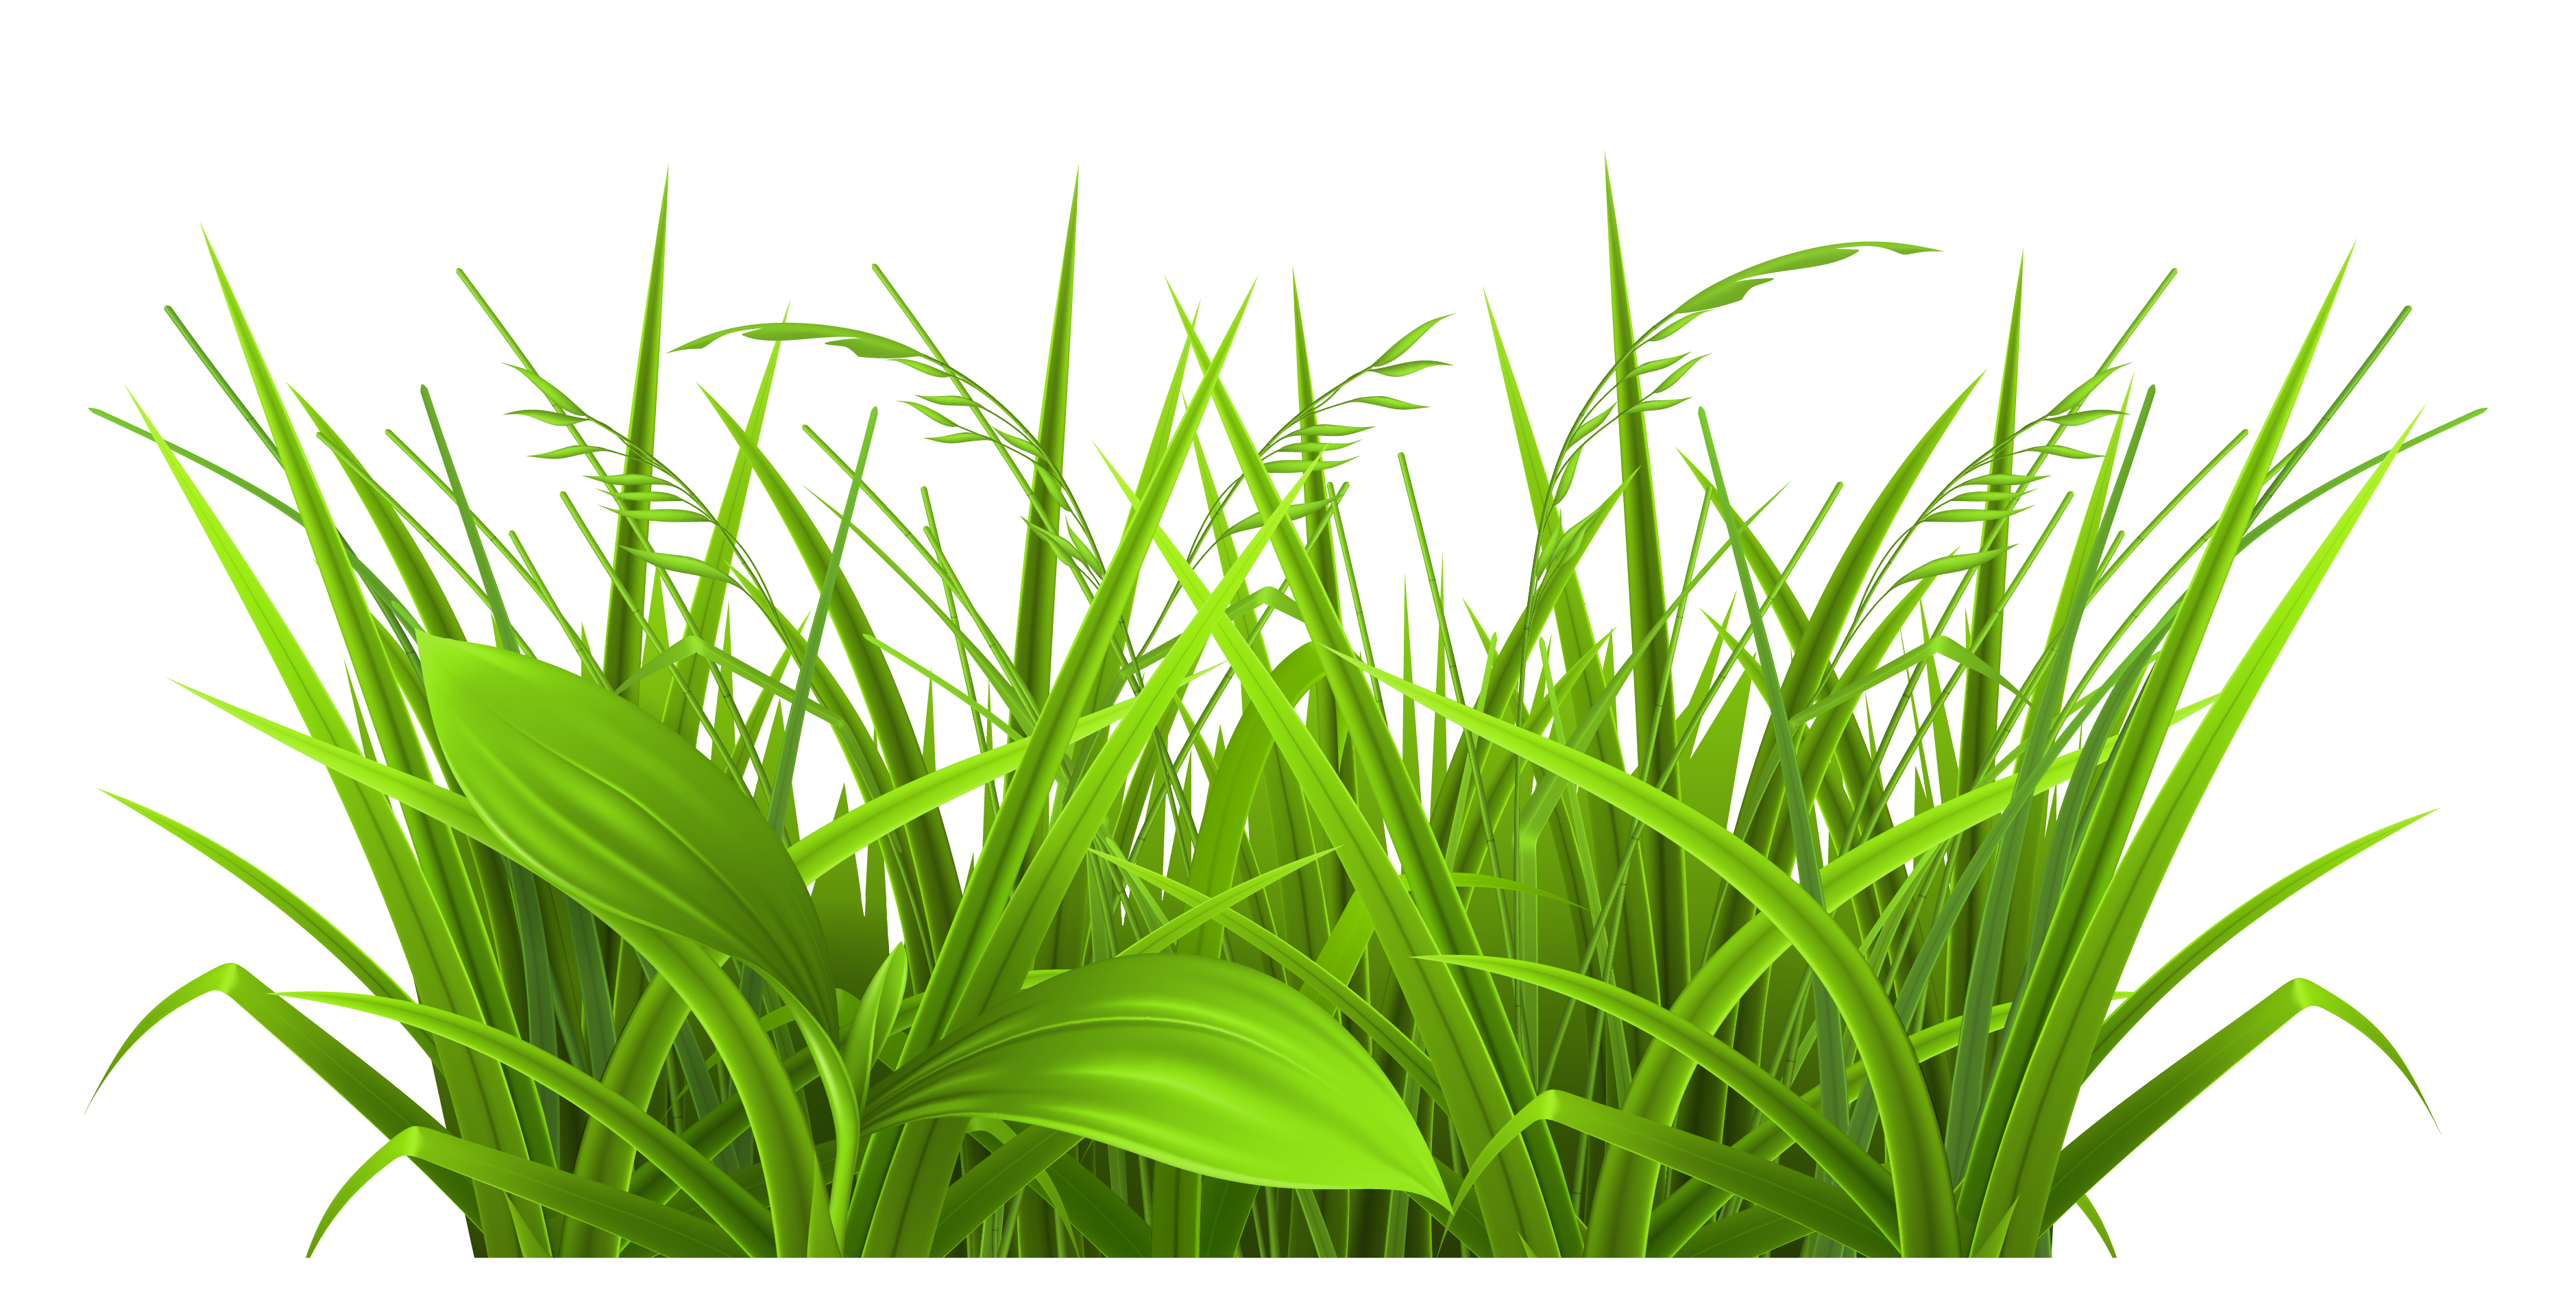 Easter Eggs On Grass PNG Image With Transparent Background png - Free PNG  Images